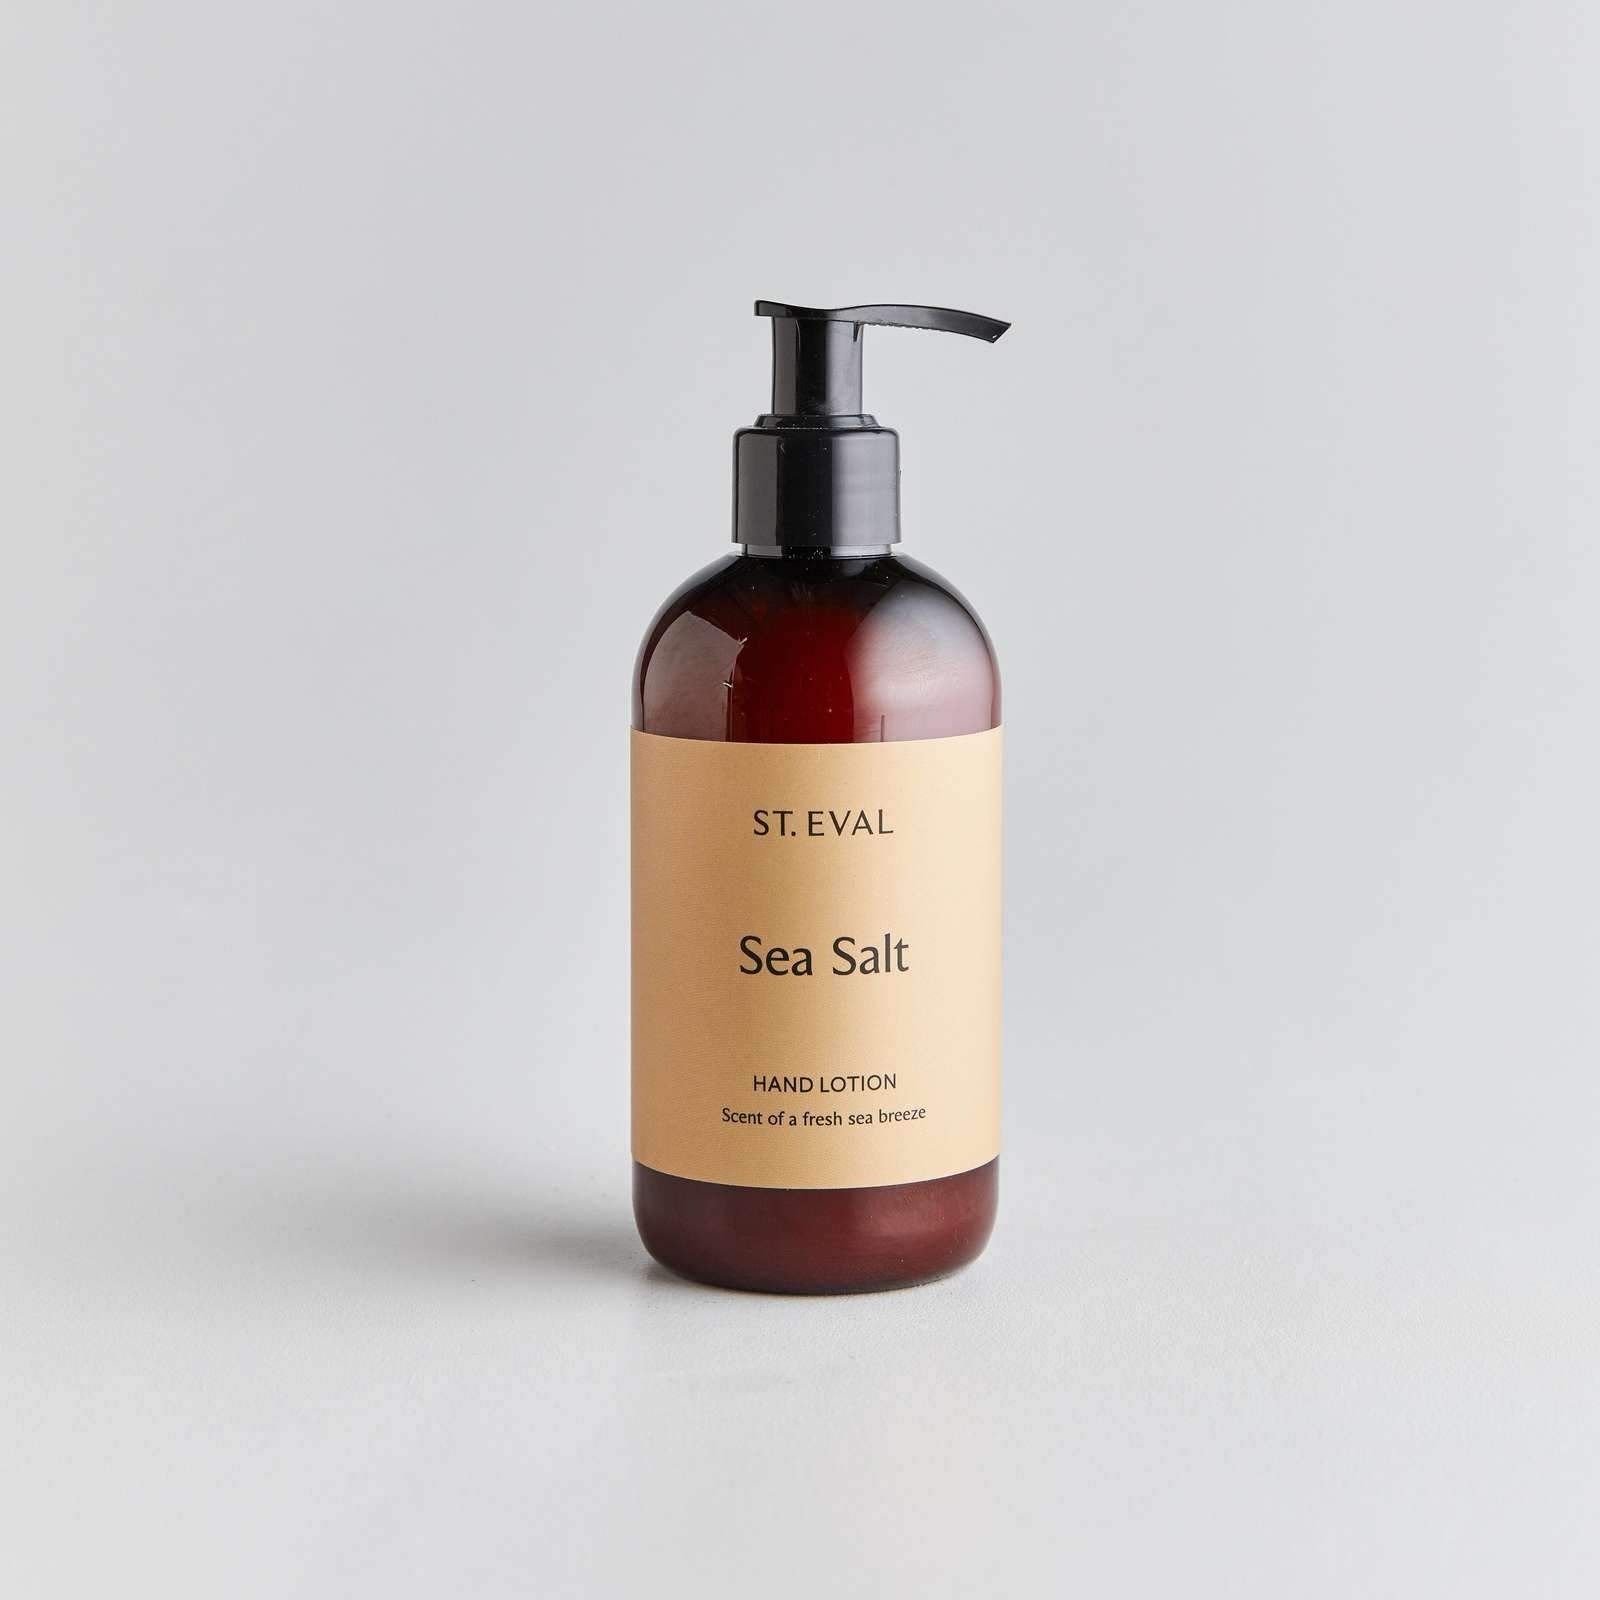 Sea Salt Scented Hand Lotion | St. Eval – St. Eval Candle Company